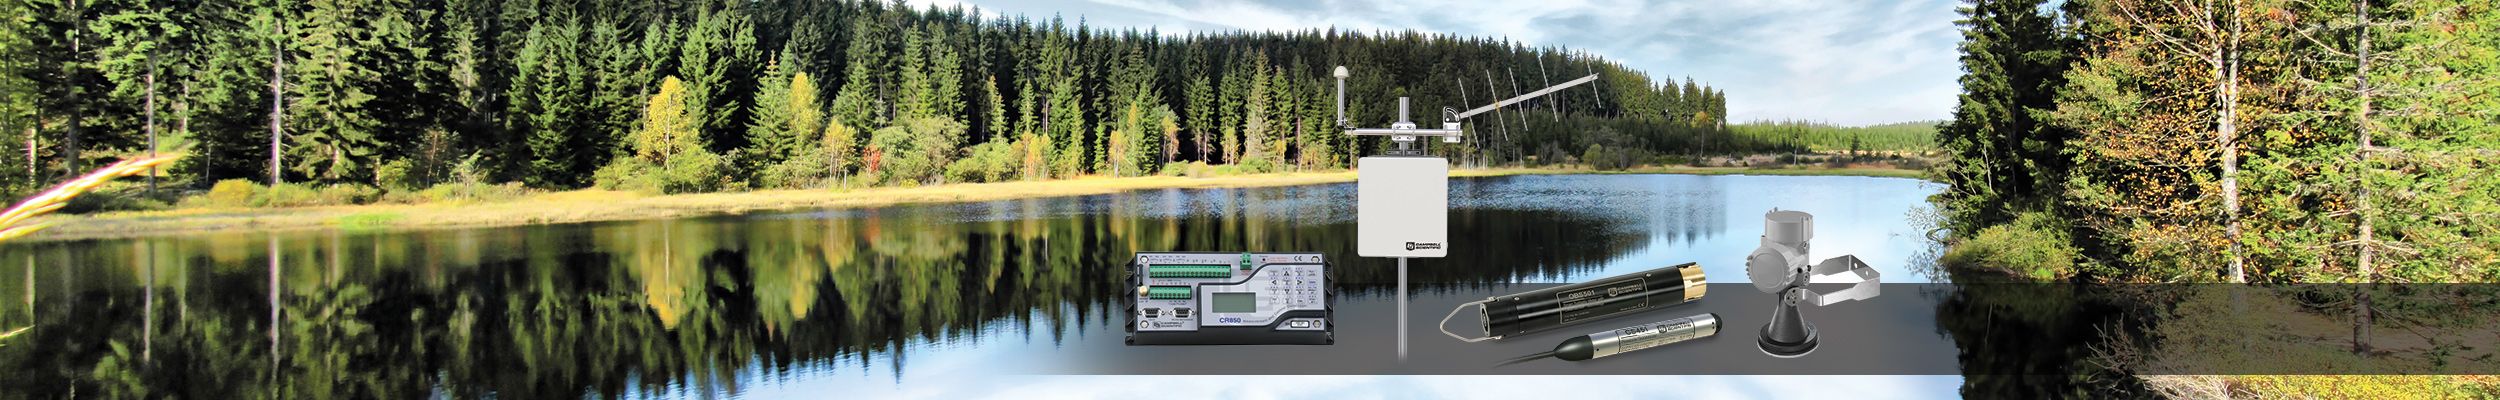 Water High-performance hydromet and water quality instrumentation that just works